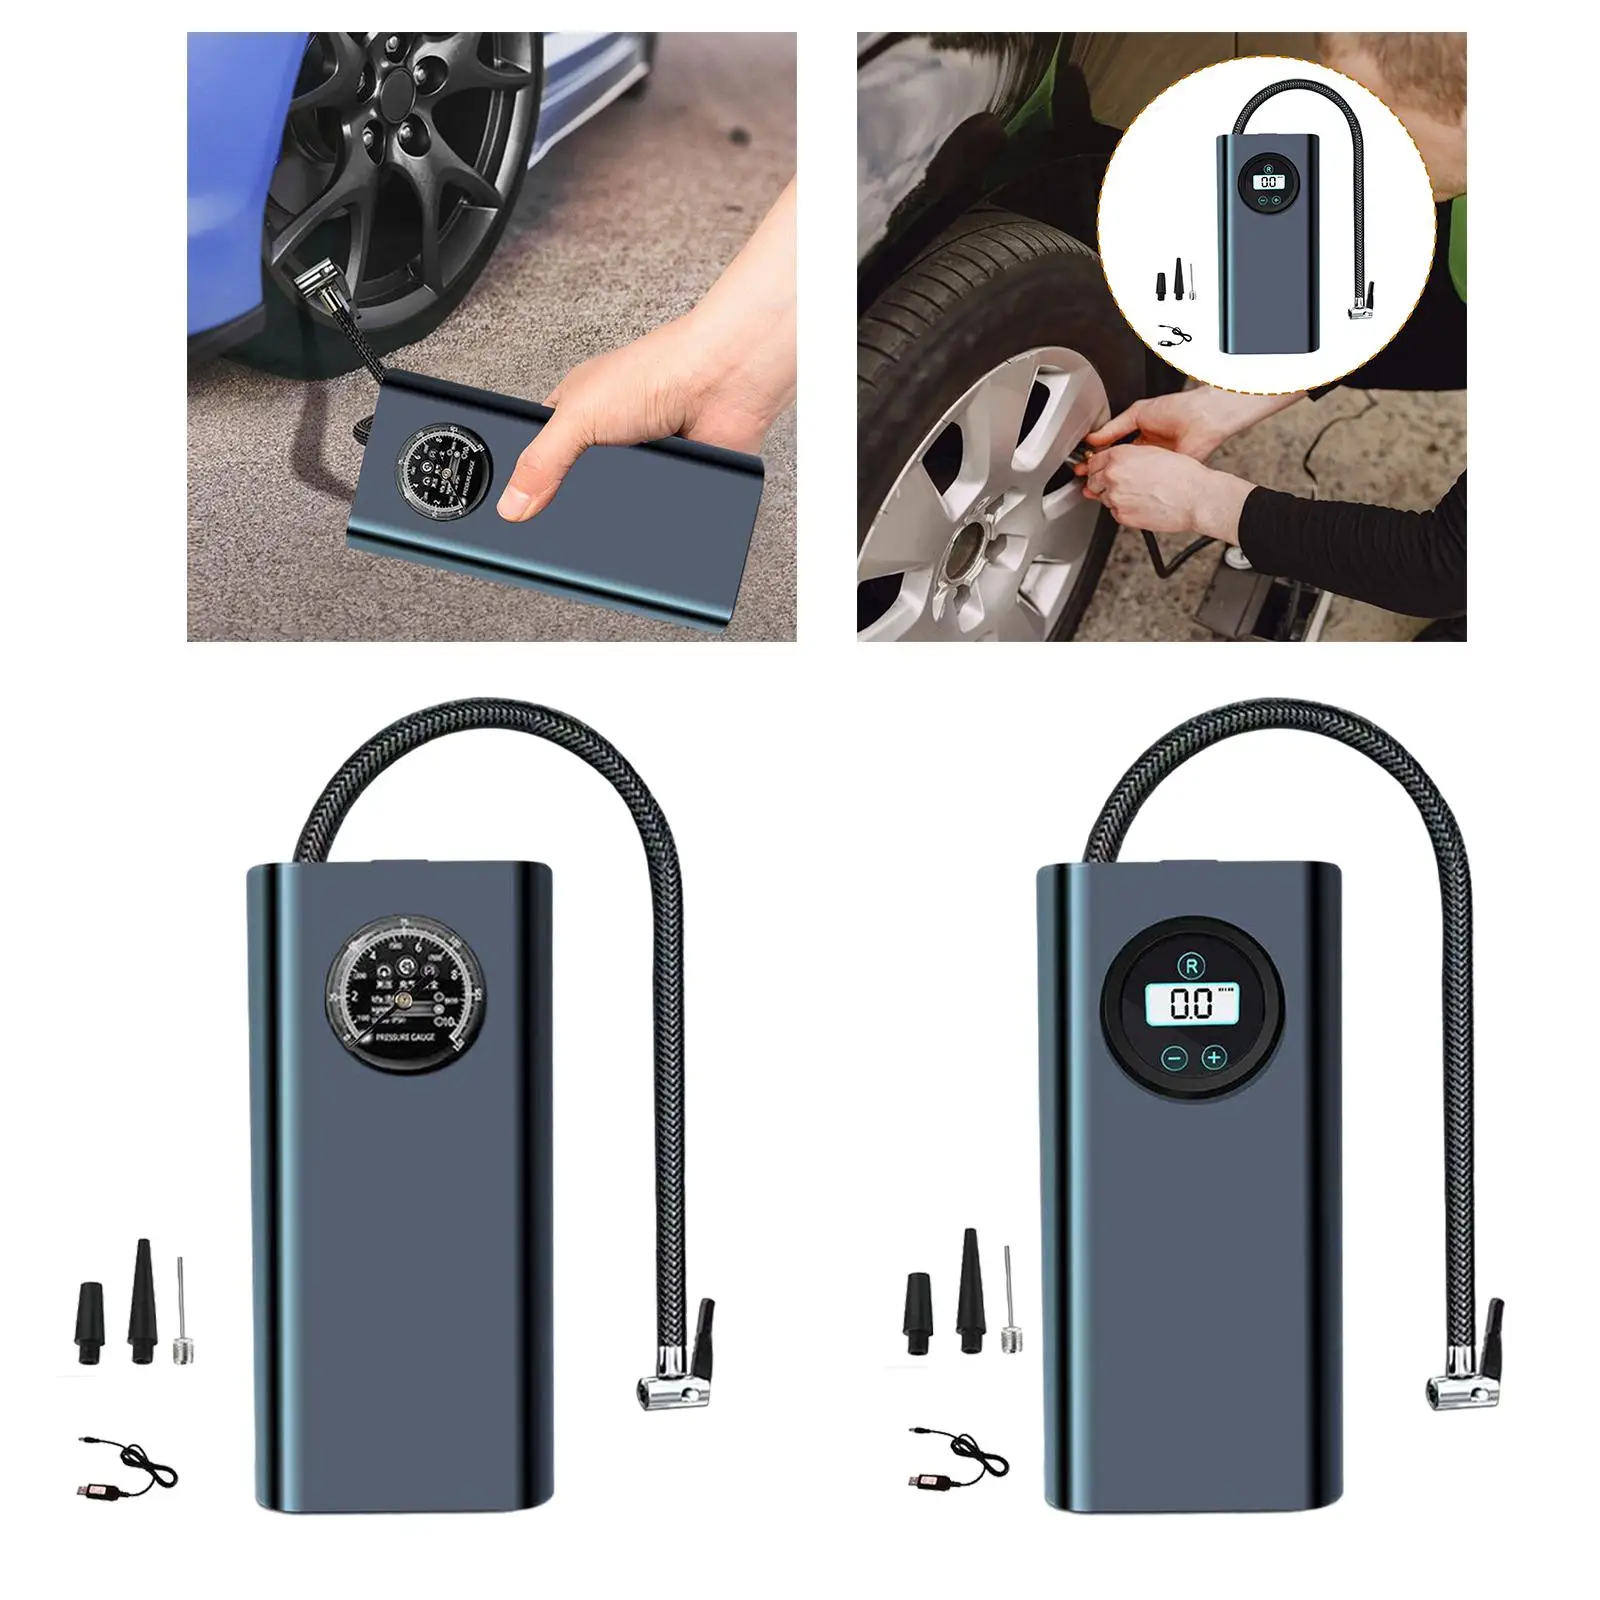 Cordless Tire Inflator 150PSI Portable Handheld Charging Pump Tire Electric Inflator for Motorcycle Trucks Bike SUV Cars